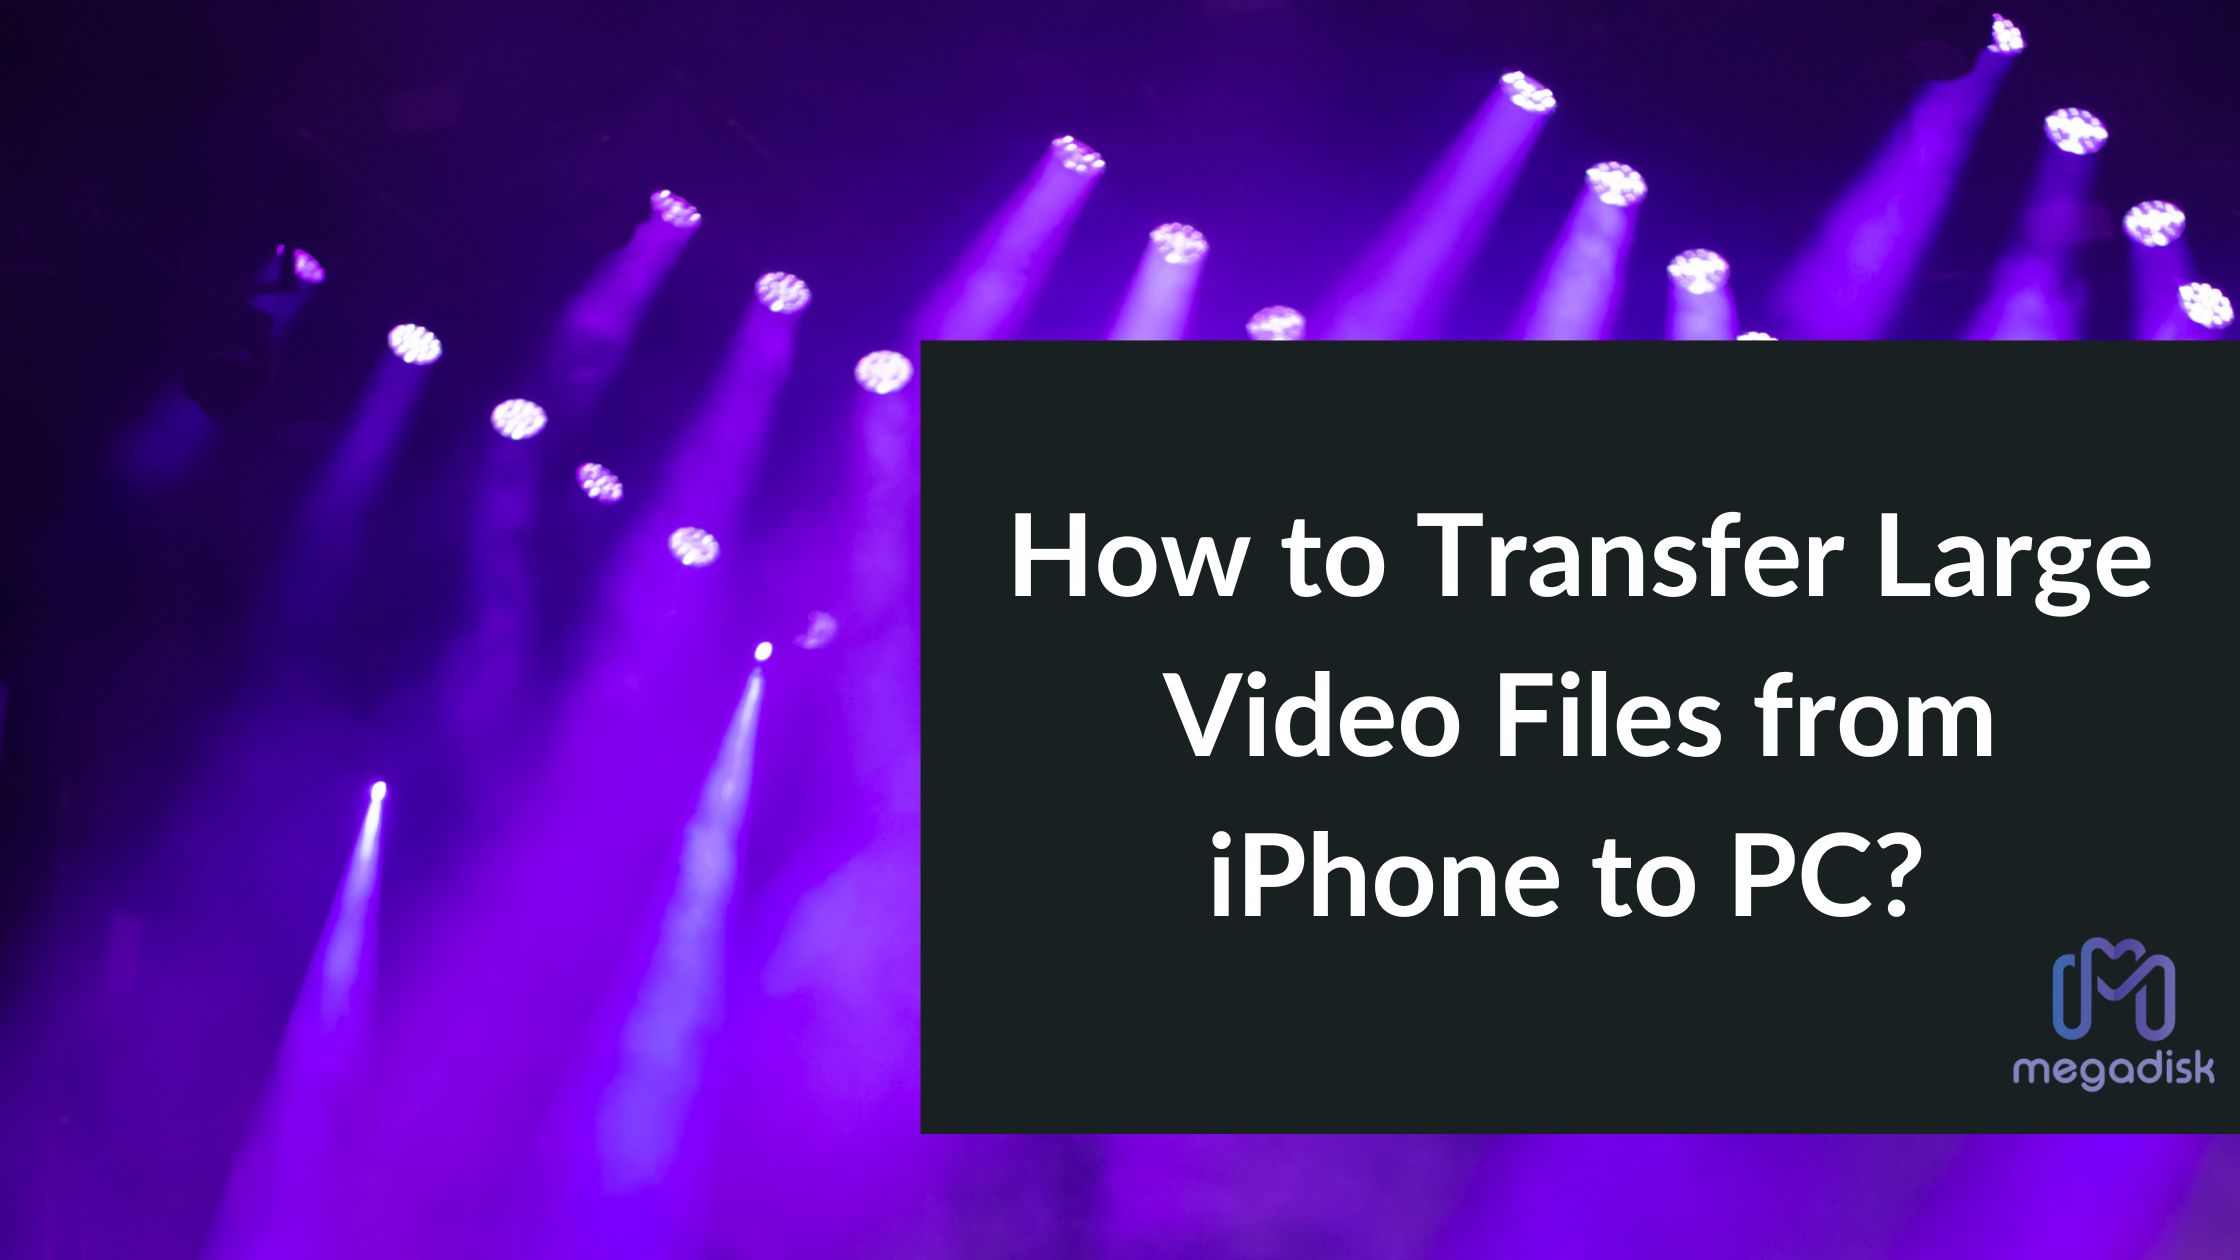 How to Transfer Large Video Files from iPhone to PC?